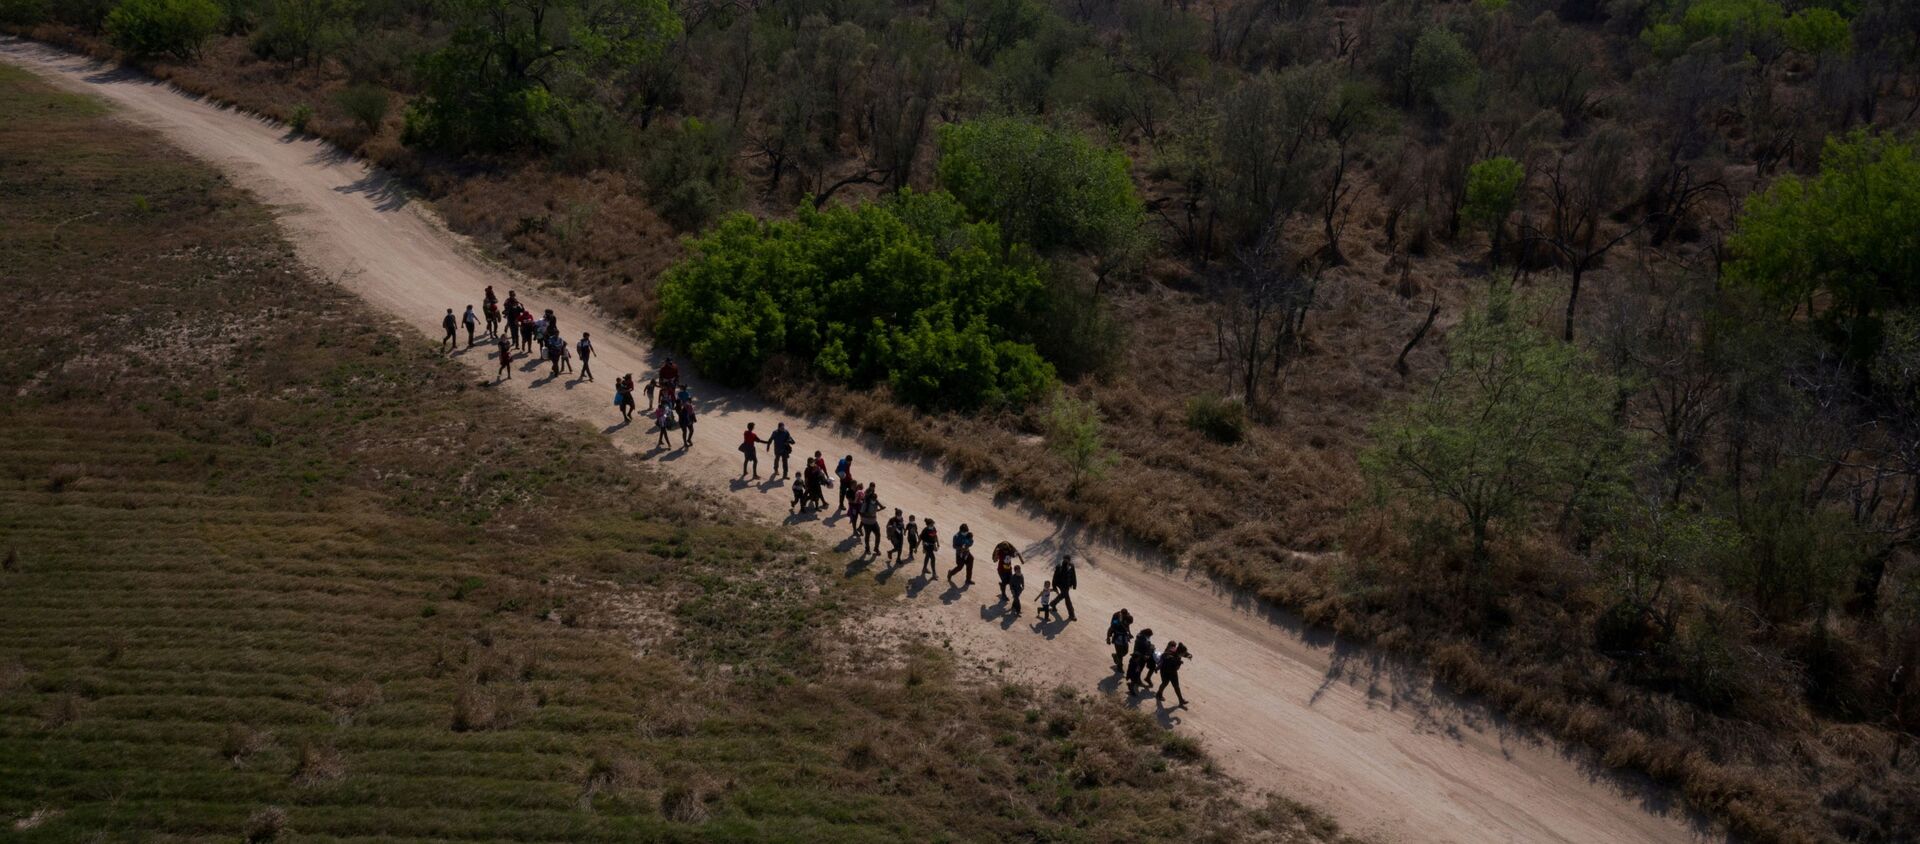 Asylum seeking migrant families from Central America walk towards the border wall after crossing the Rio Grande river into the United States from Mexico on rafts in Penitas, Texas, U.S., March 26, 2021 - Sputnik International, 1920, 09.04.2021